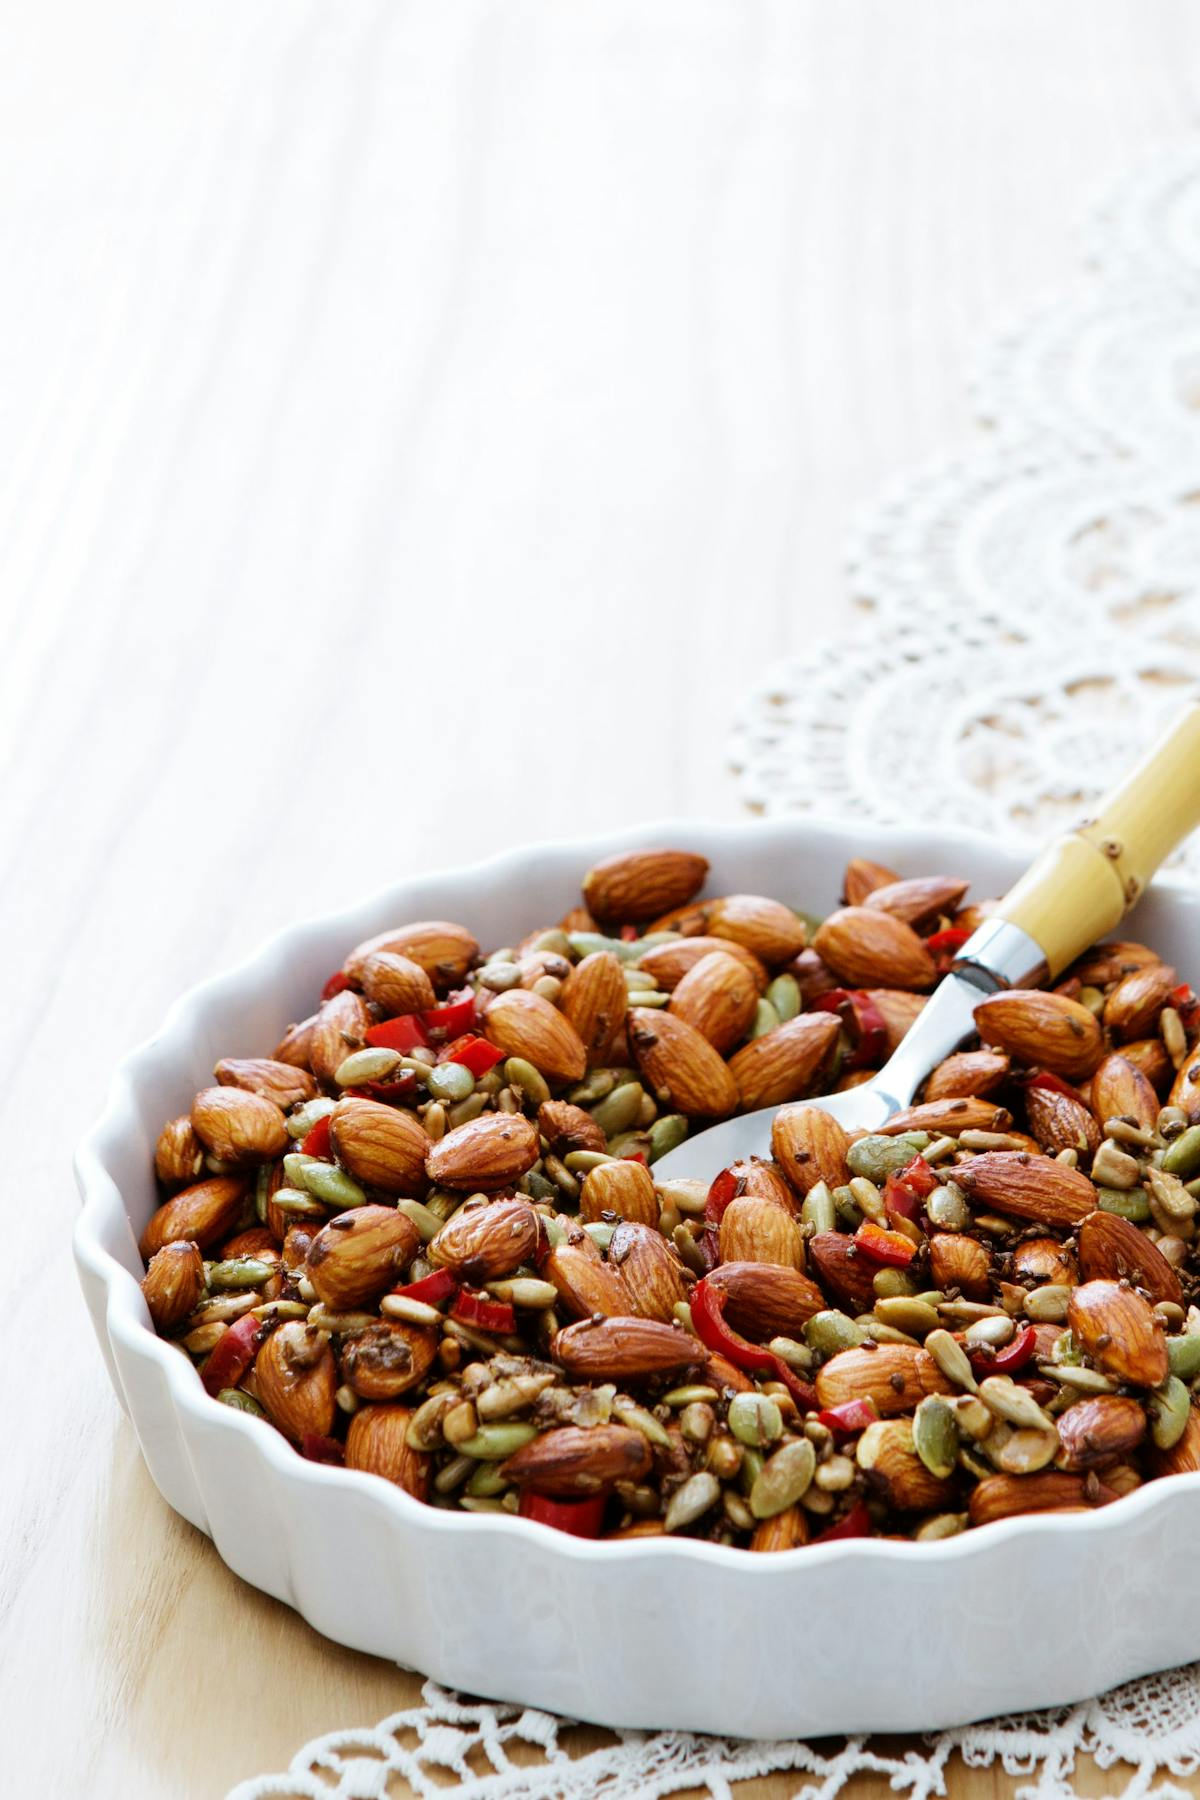 Spicy almond and seed mix